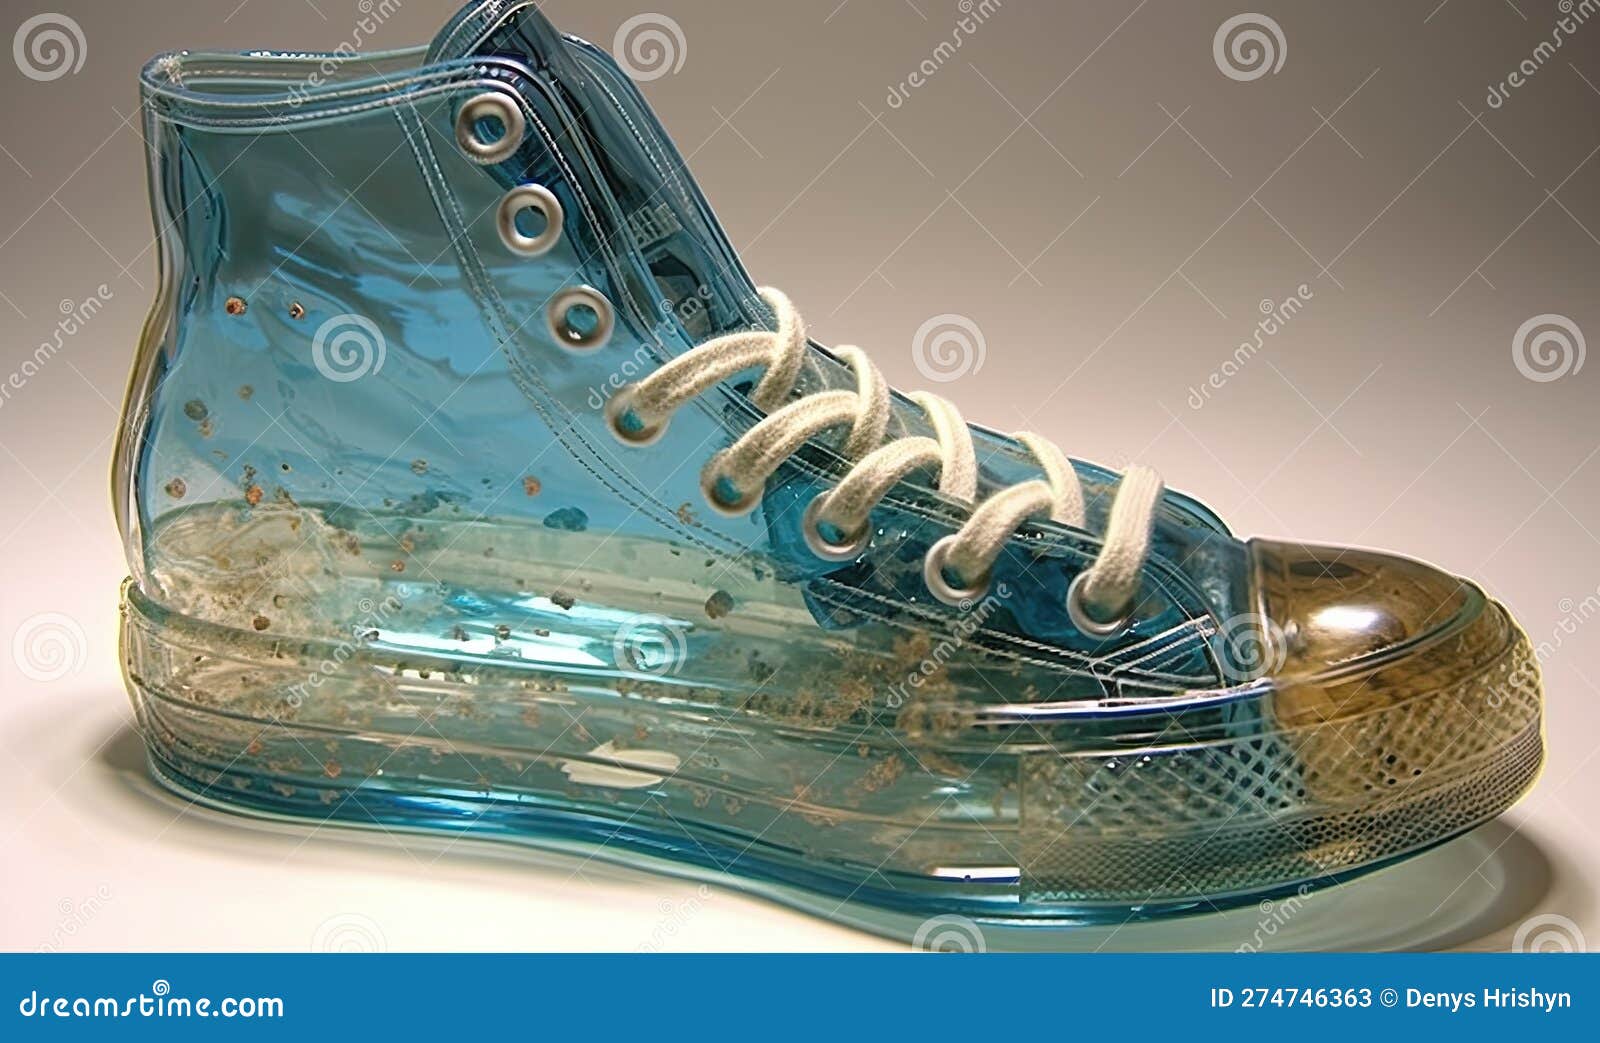 Converse Chuck Taylor Translucent Shoes Are the Coolest Summer Style